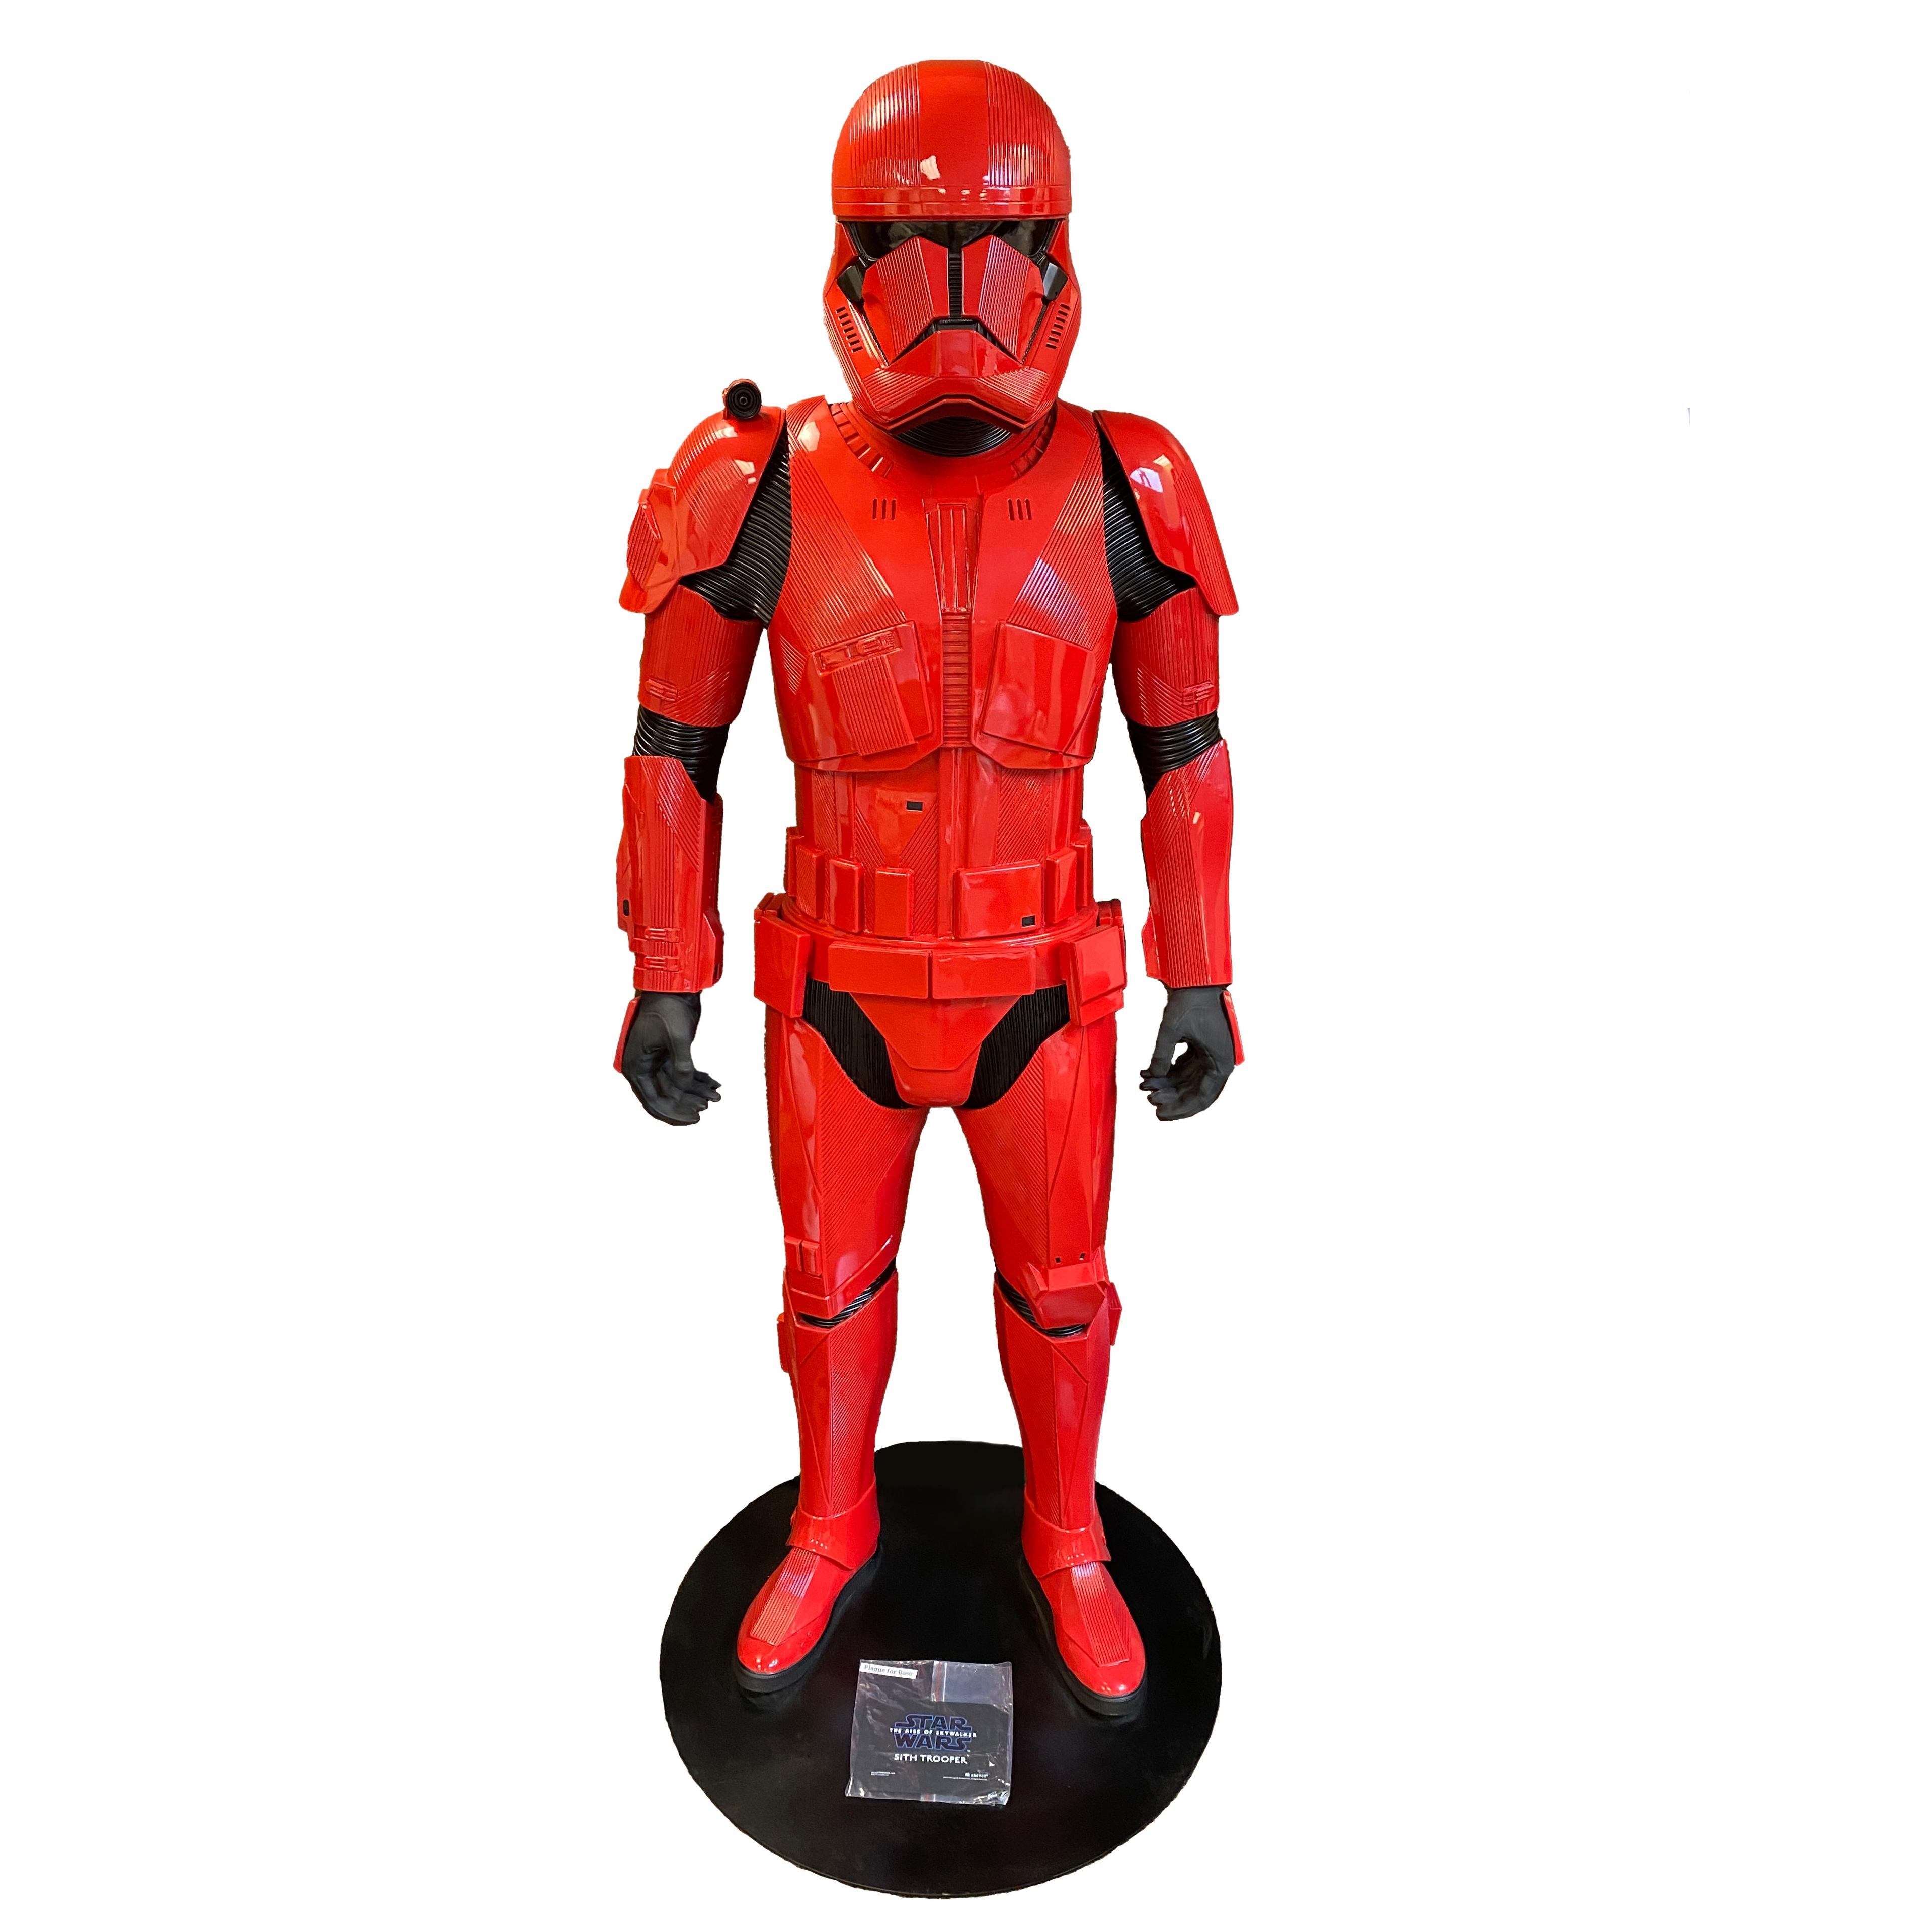 Star Wars The Rise Of Skywalker Sith Trooper Life Size Statue